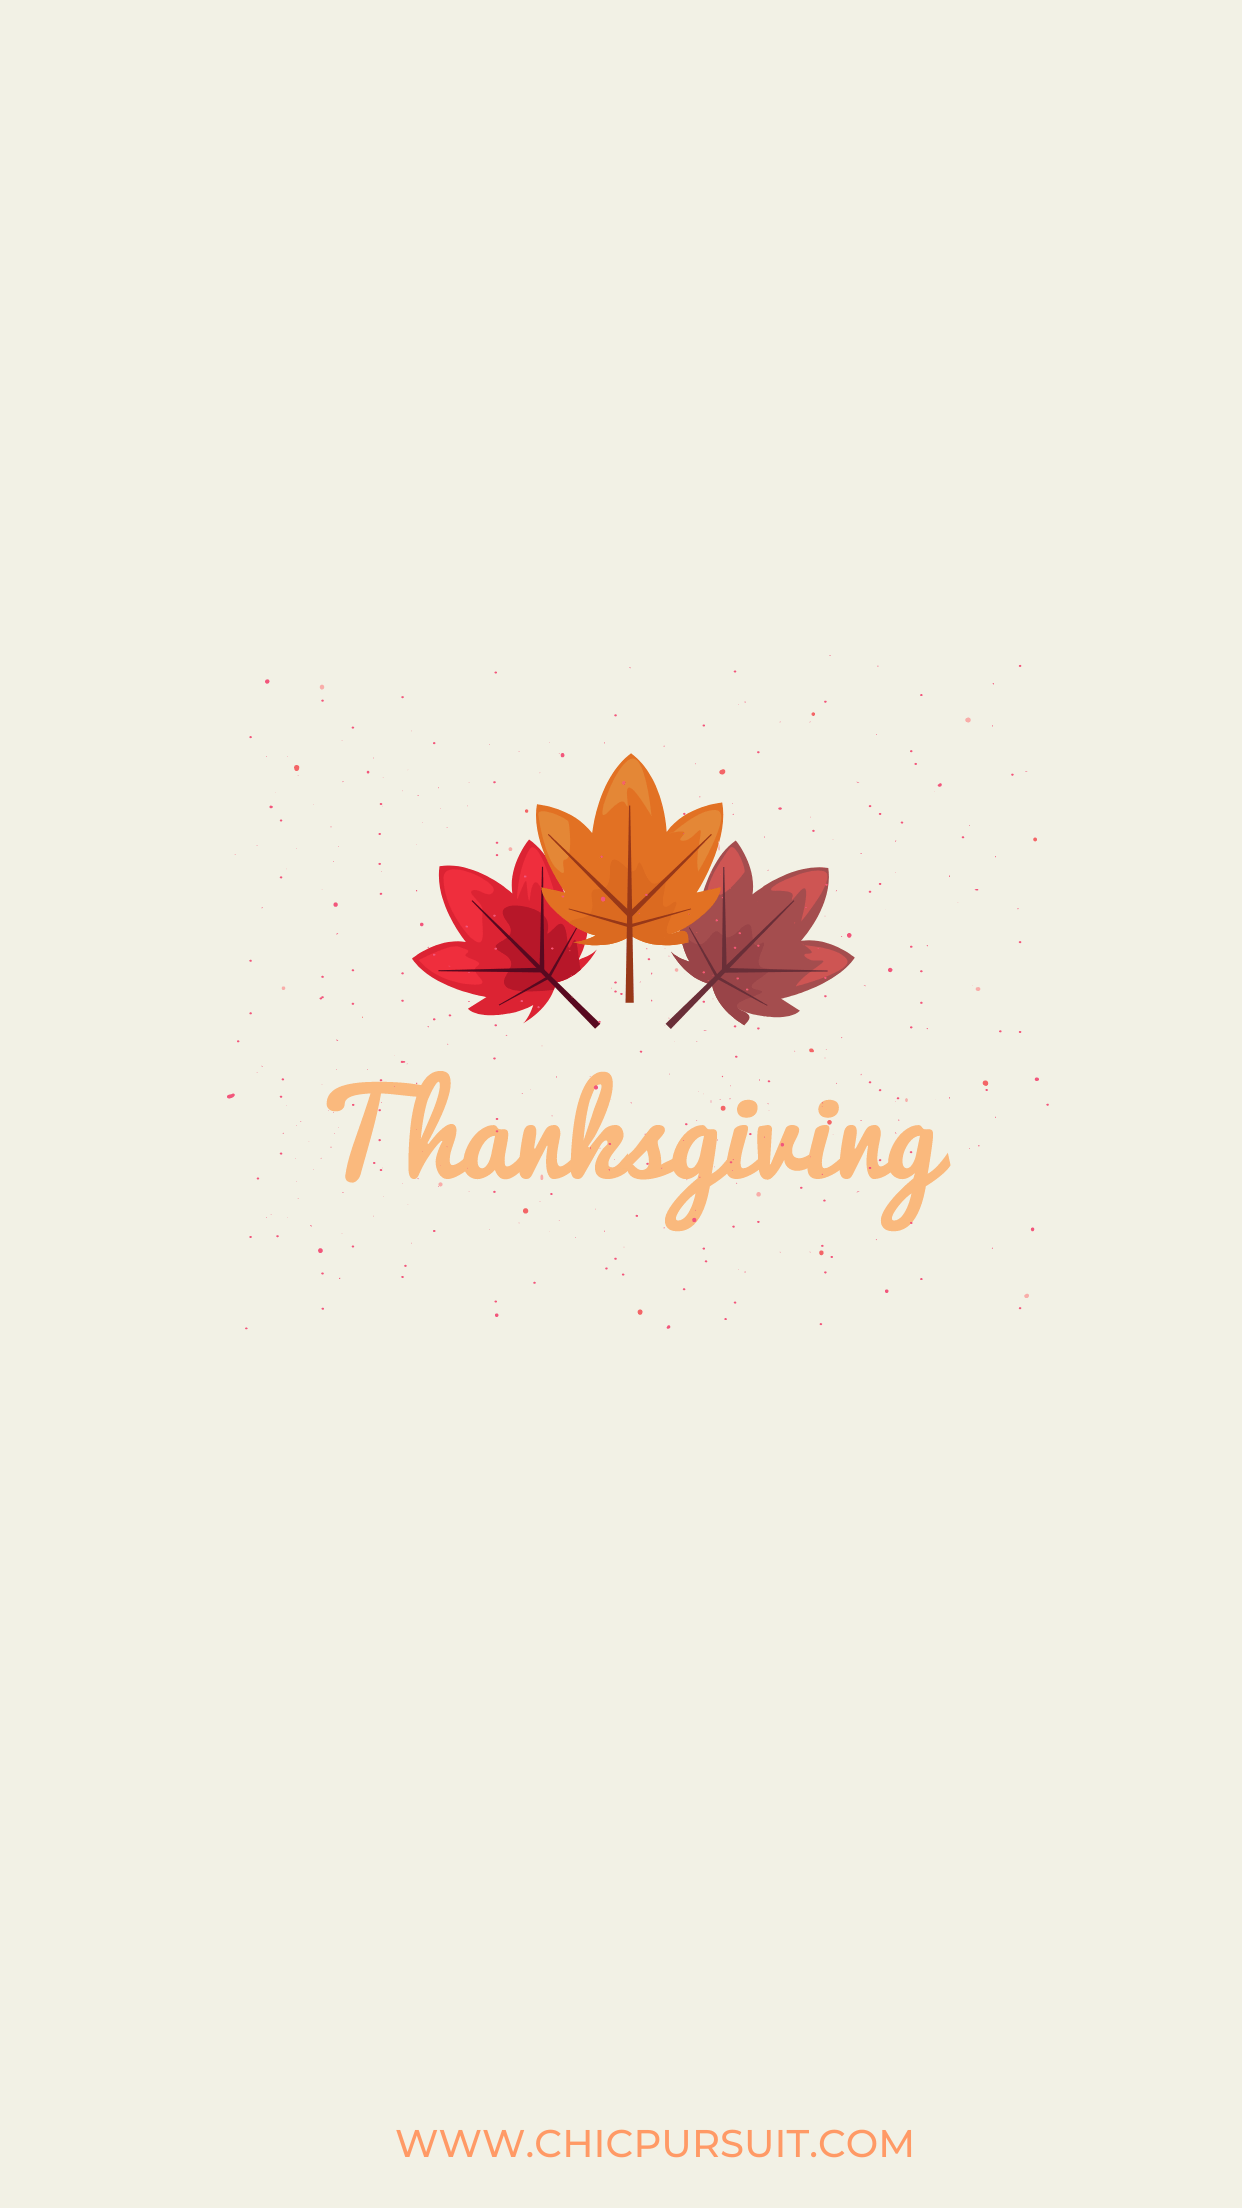 Thanksgiving wallpaper with colorful leaves and the words 